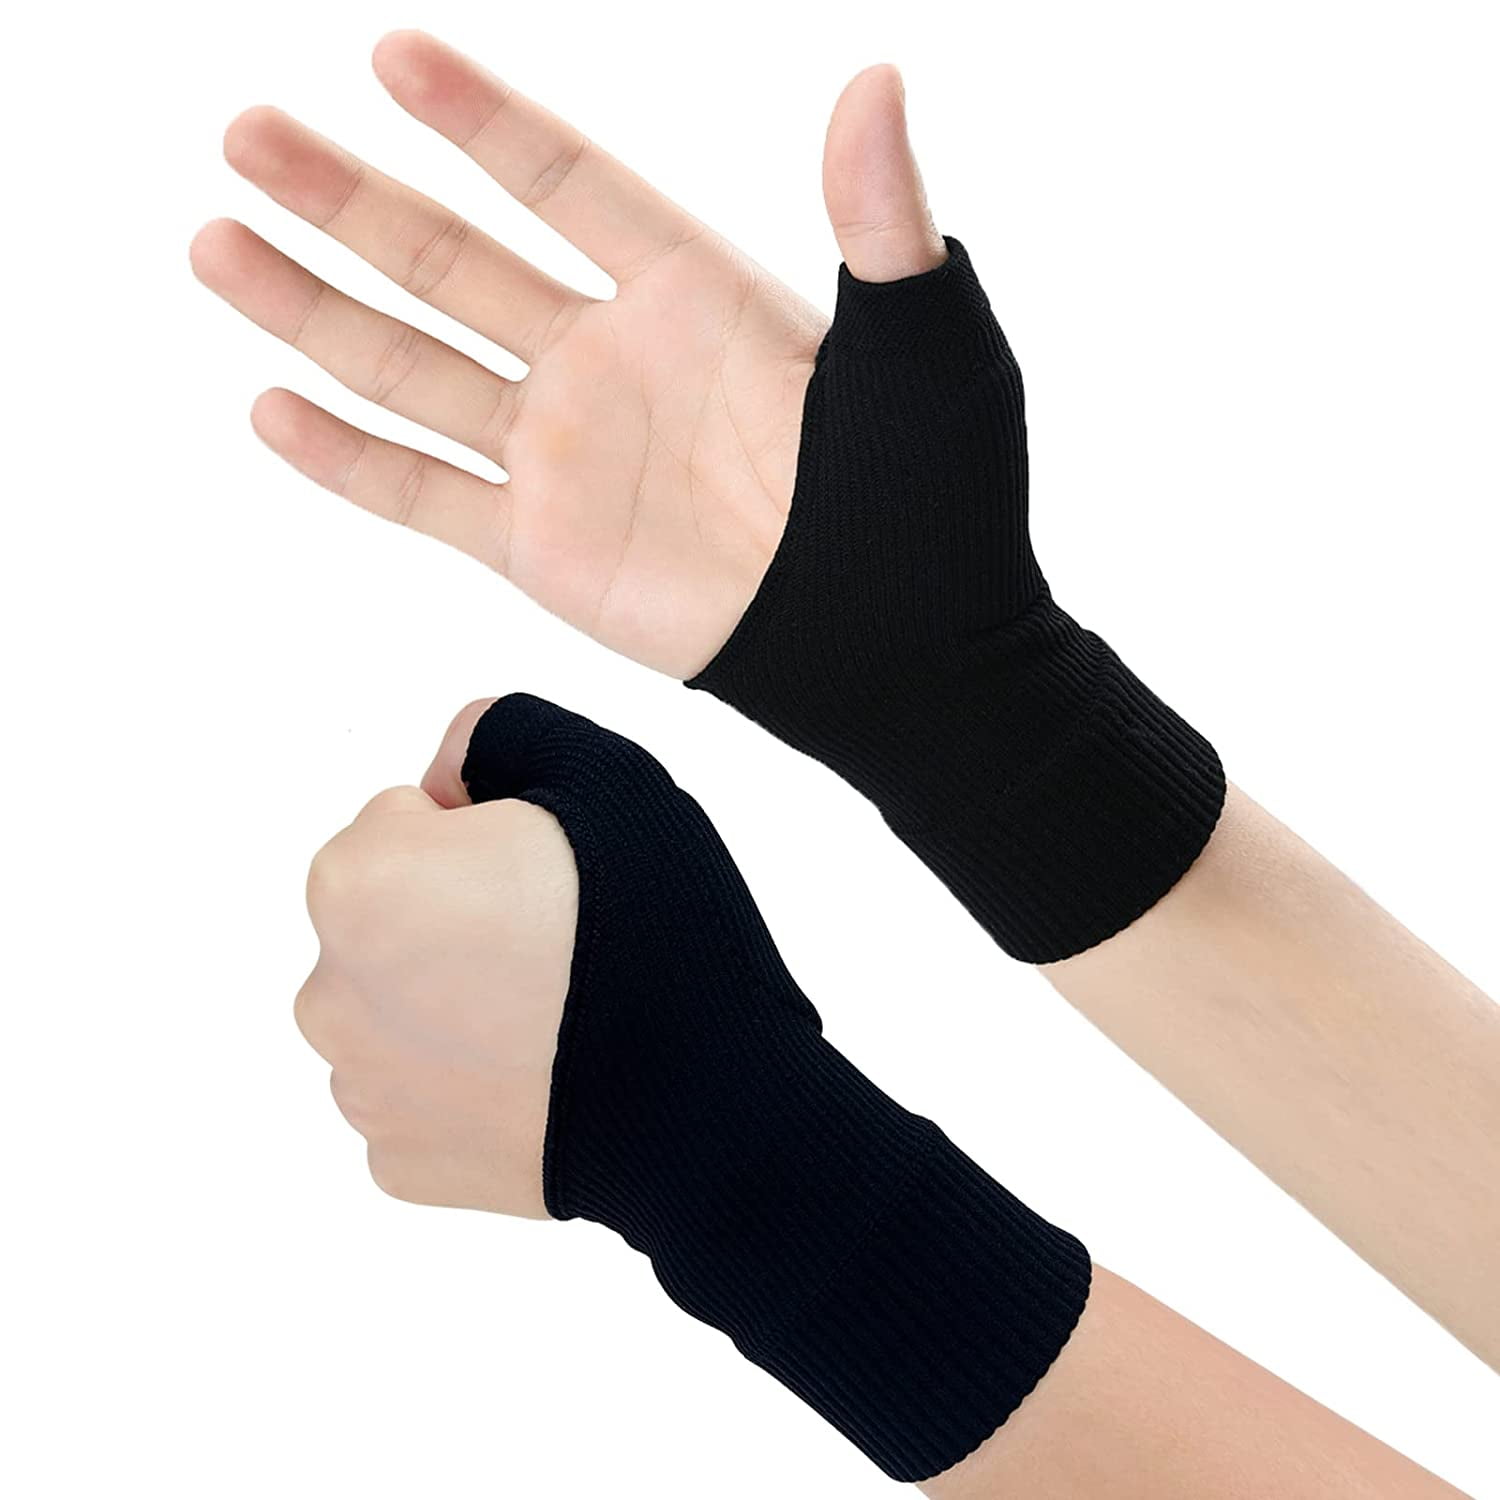 17 Gifts for People with Arthritis